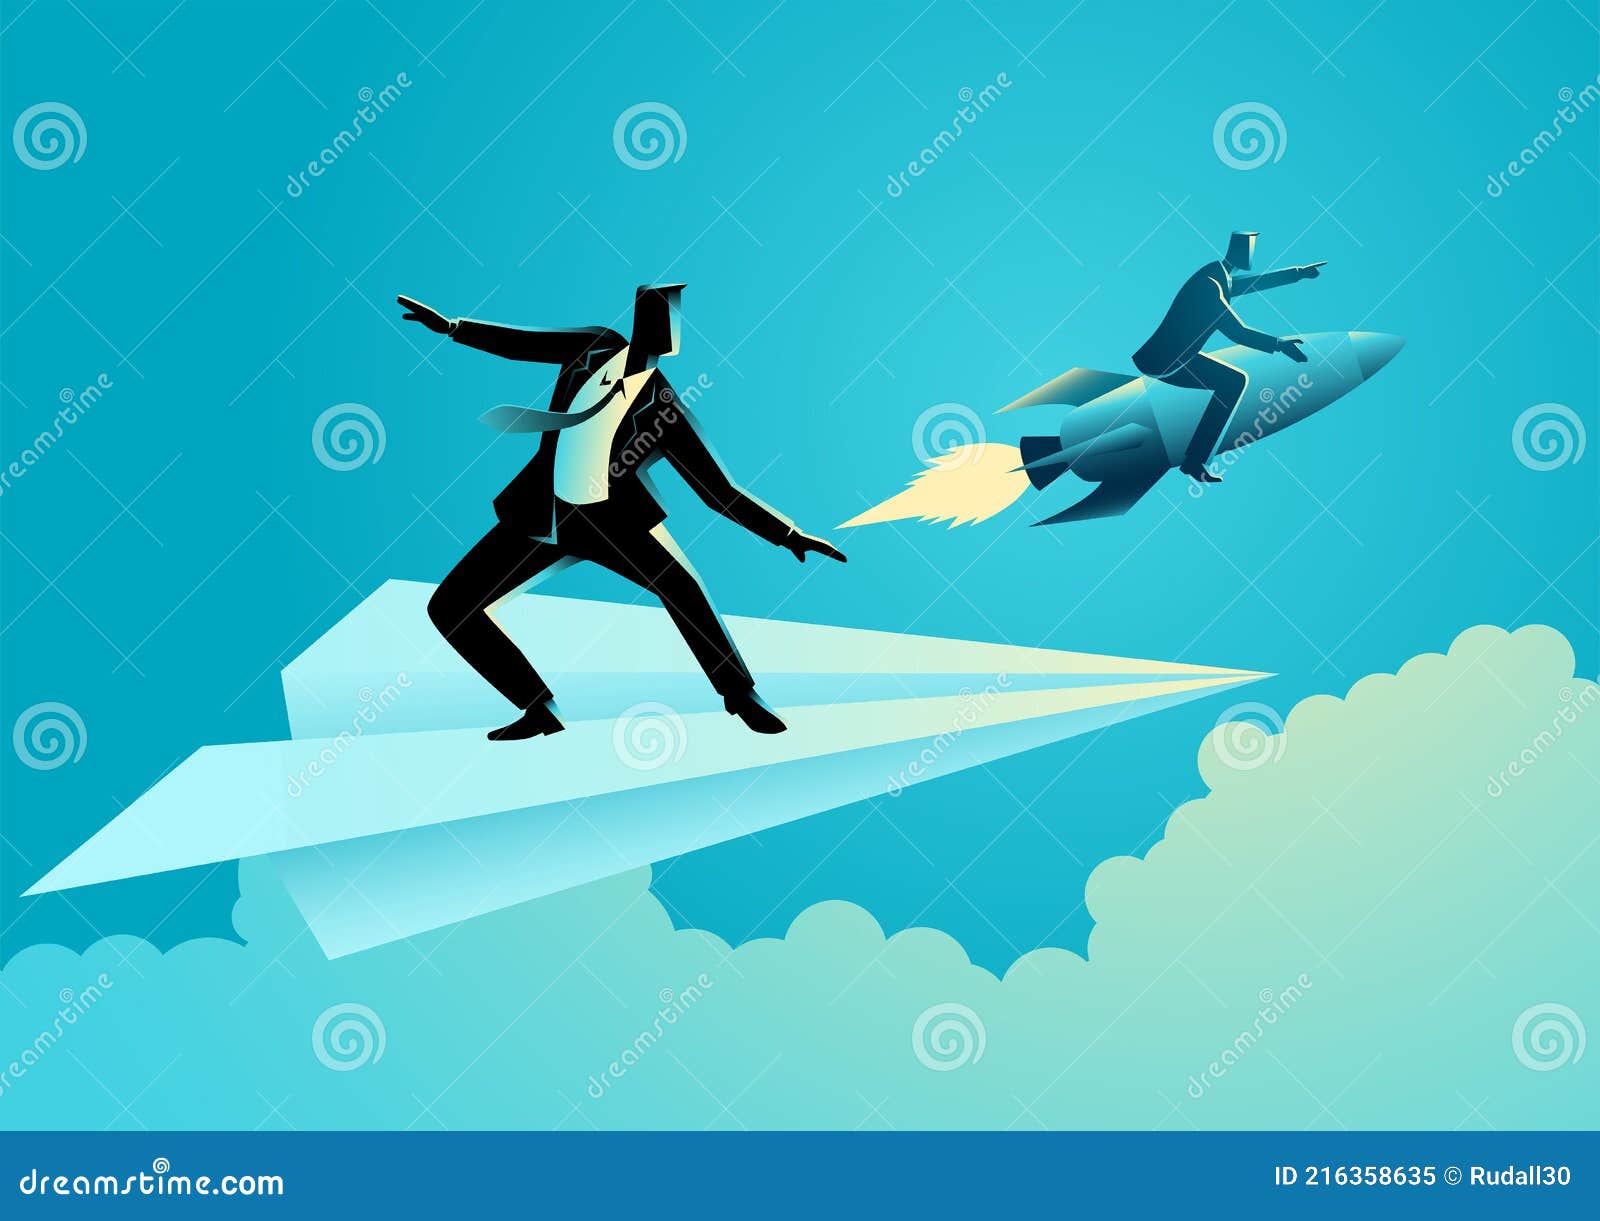 businessman on paper plane compete with a businessman on a rocket